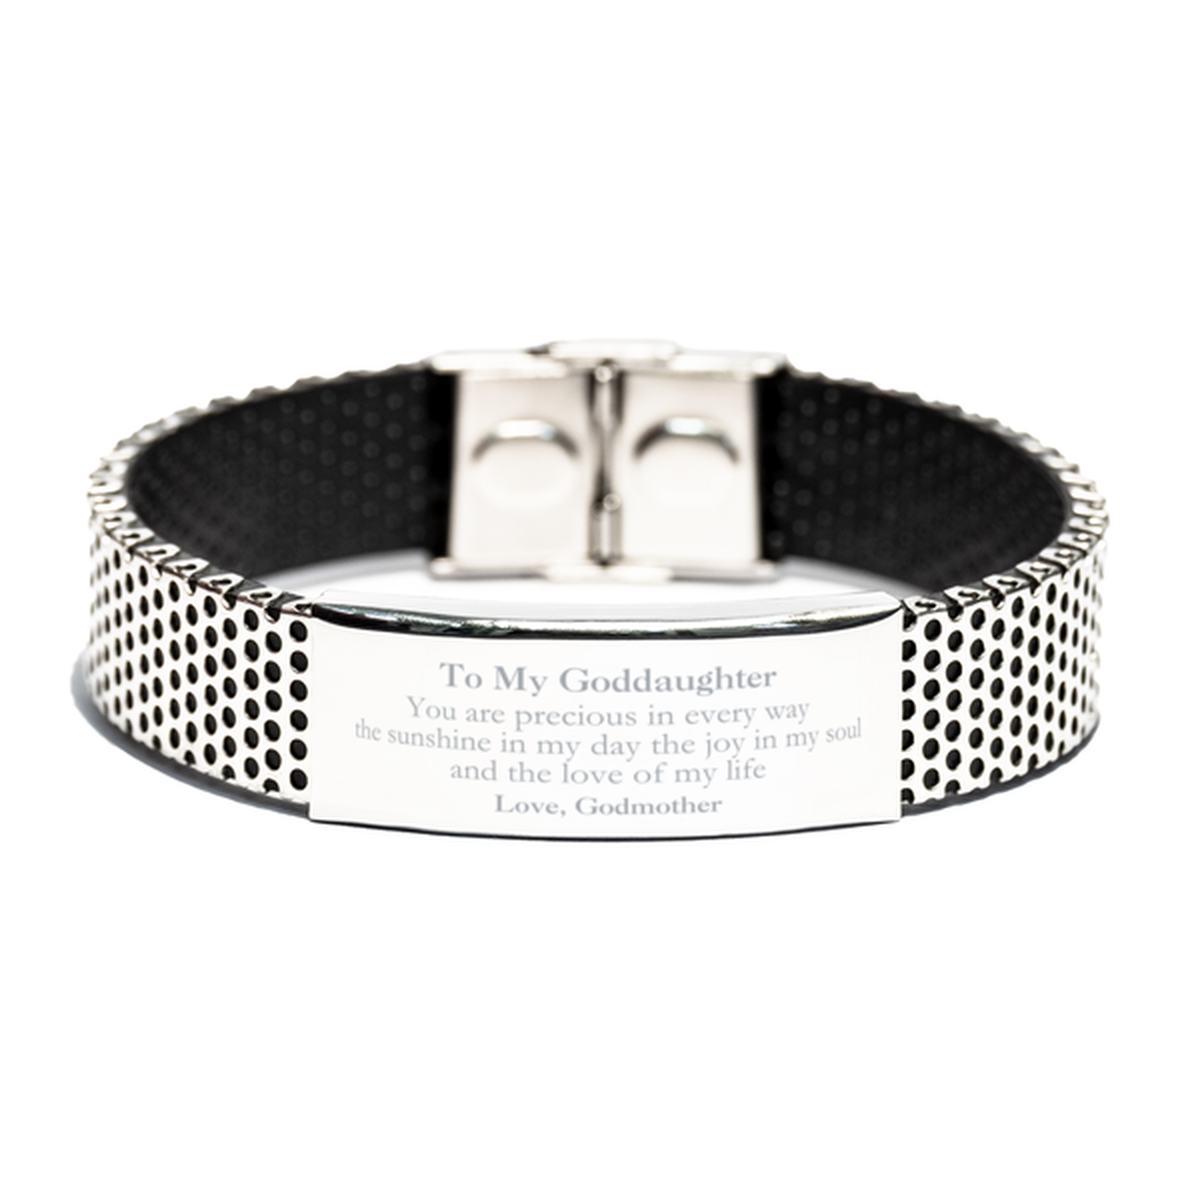 Graduation Gifts for Goddaughter Stainless Steel Bracelet Present from Godmother, Christmas Goddaughter Birthday Gifts Goddaughter You are precious in every way the sunshine in my day. Love, Godmother